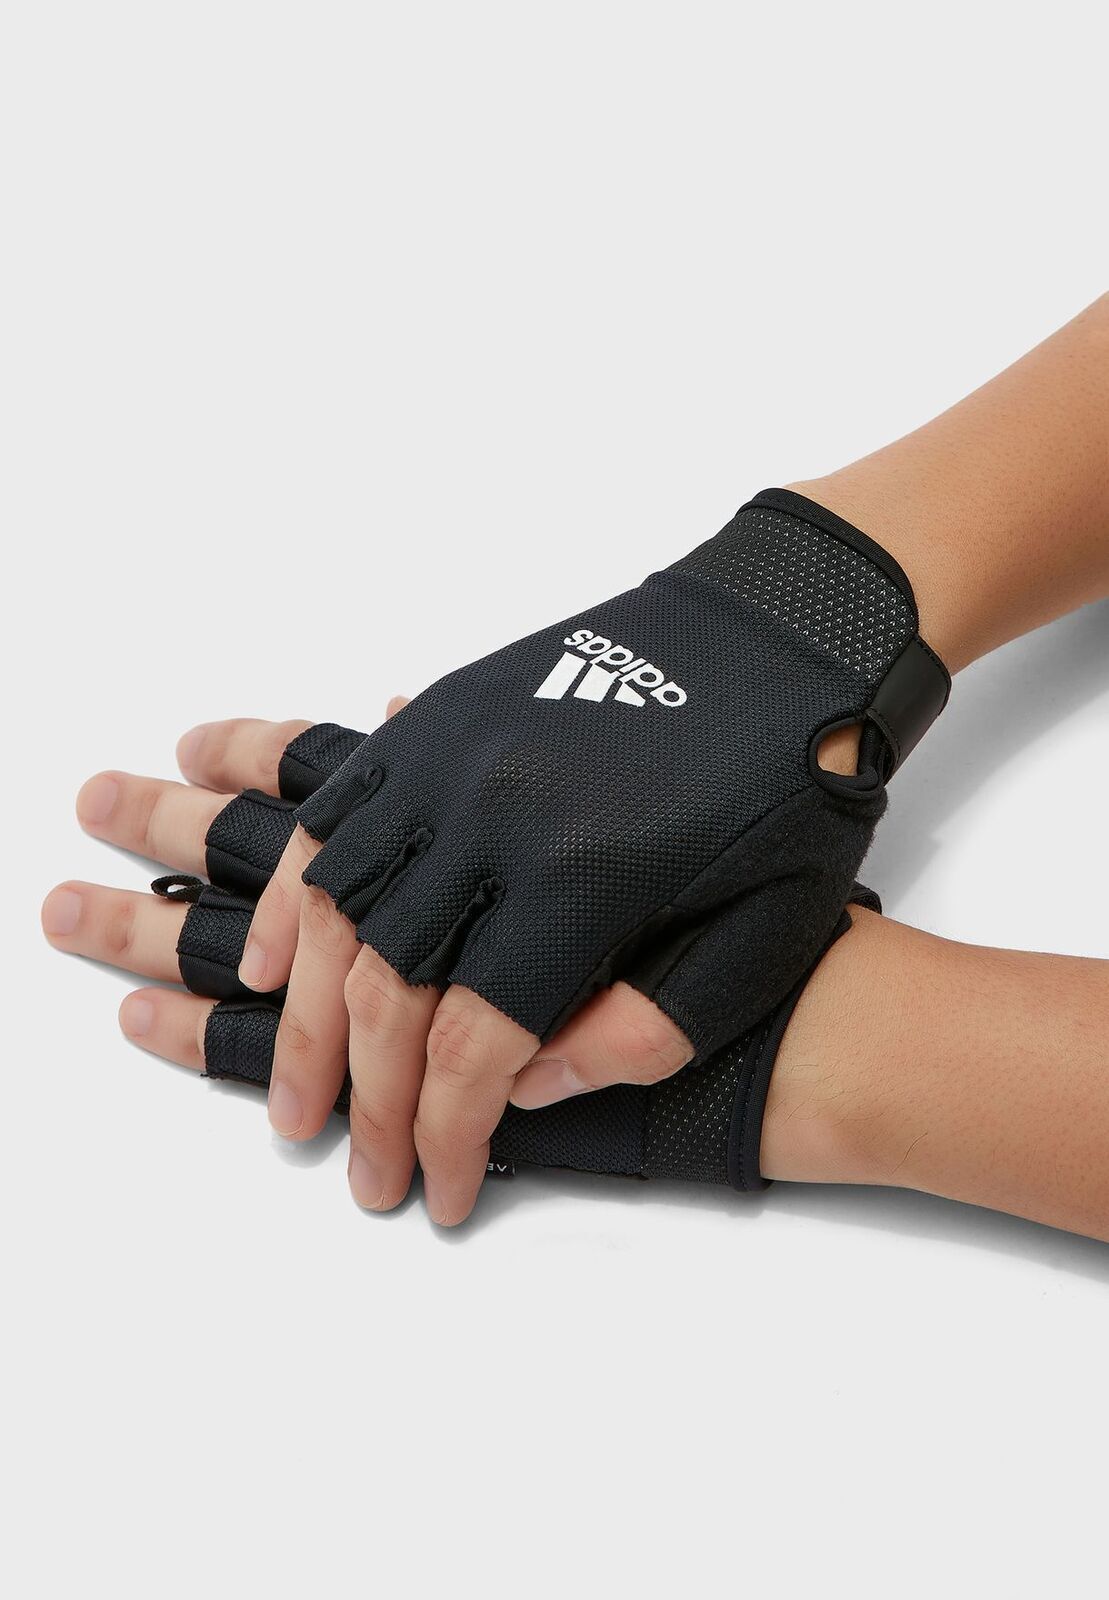 Adidas Adjustable Essential Gloves Weight Lifting Gym Workout Training - Black - Small